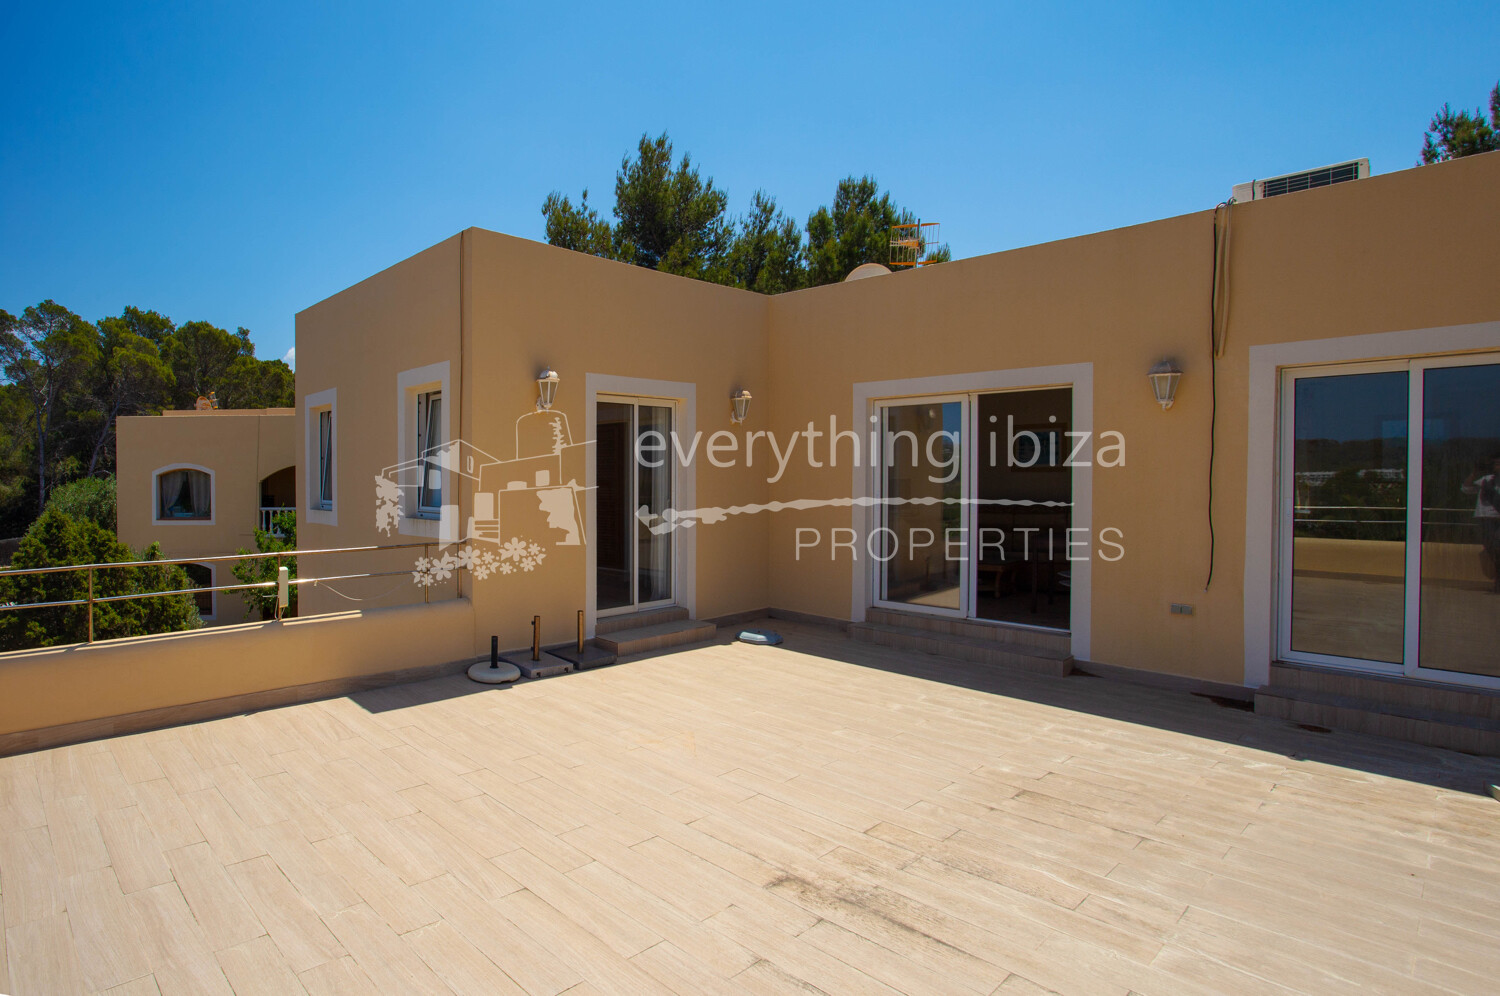 Beautiful Villa Close to Beach with Stunning Sea and Sunset Views, ref.1643, for sale in Ibiza by everything ibiza Properties